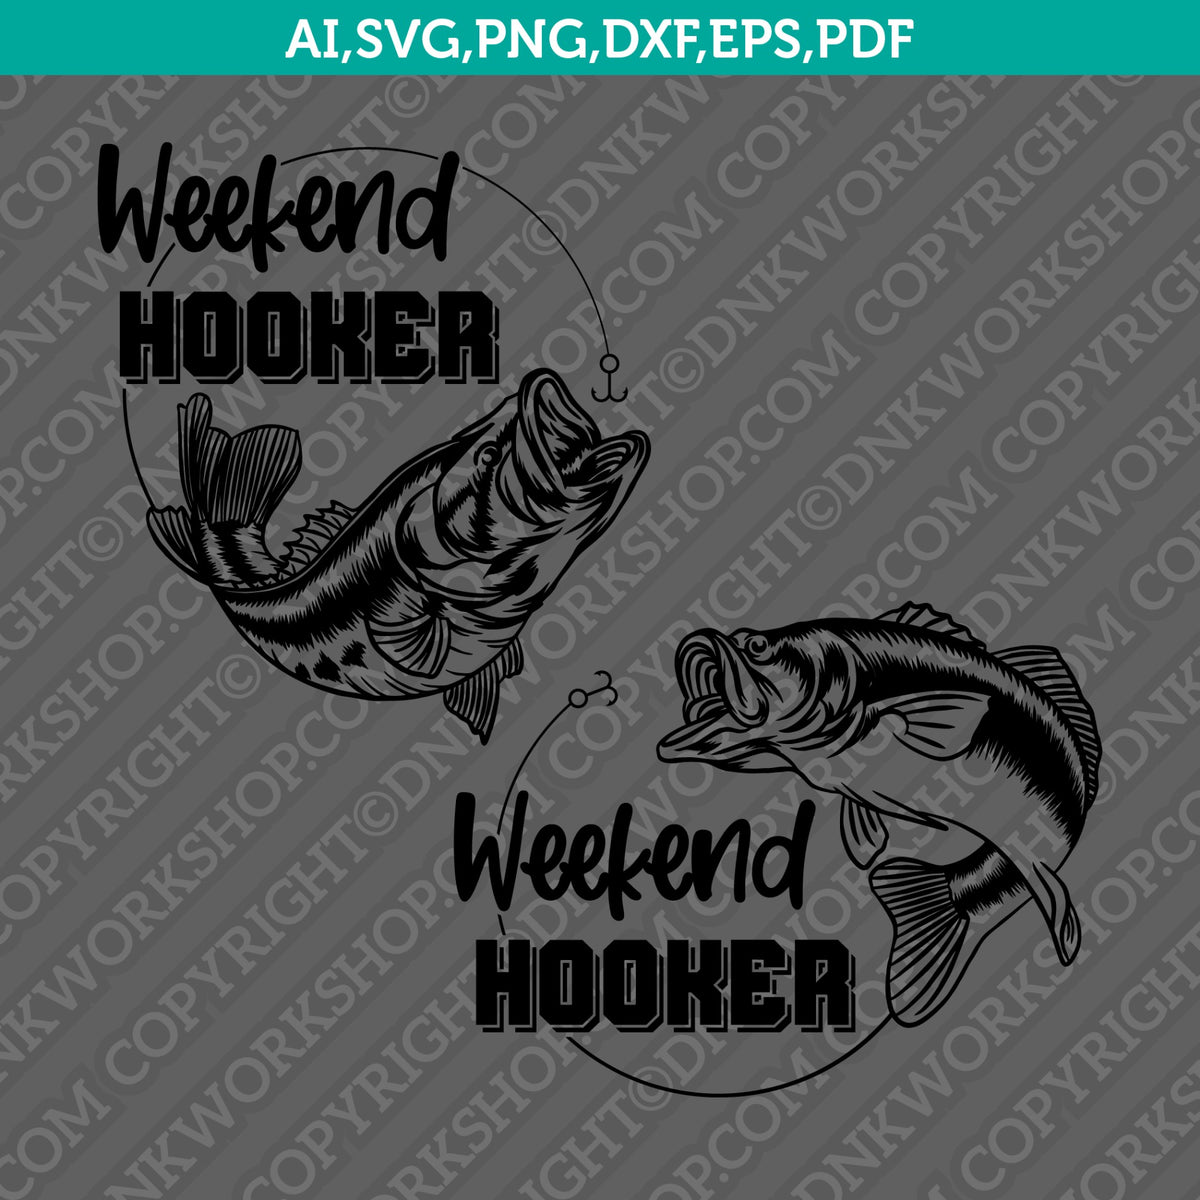 Fishing Wall Decal Vinyl Wall Sticker - Weekend Hooker Quote